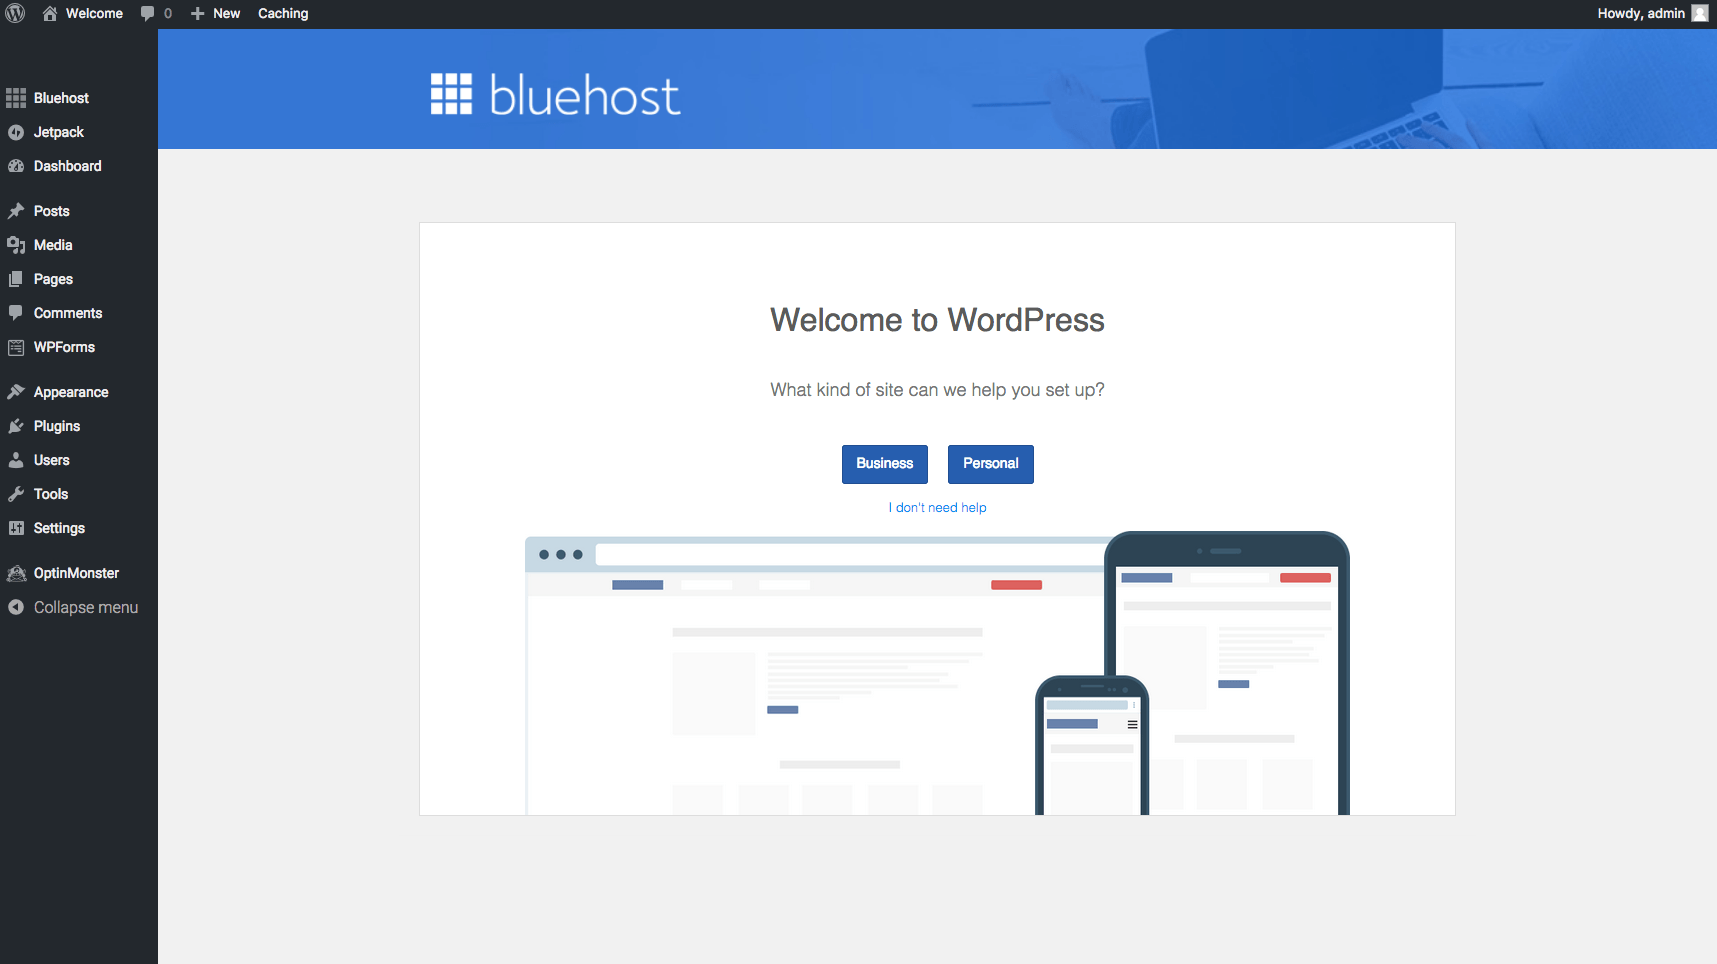 How to start a self-hosted WordPress blog with Bluehost - Step 2.11: Login to WordPress